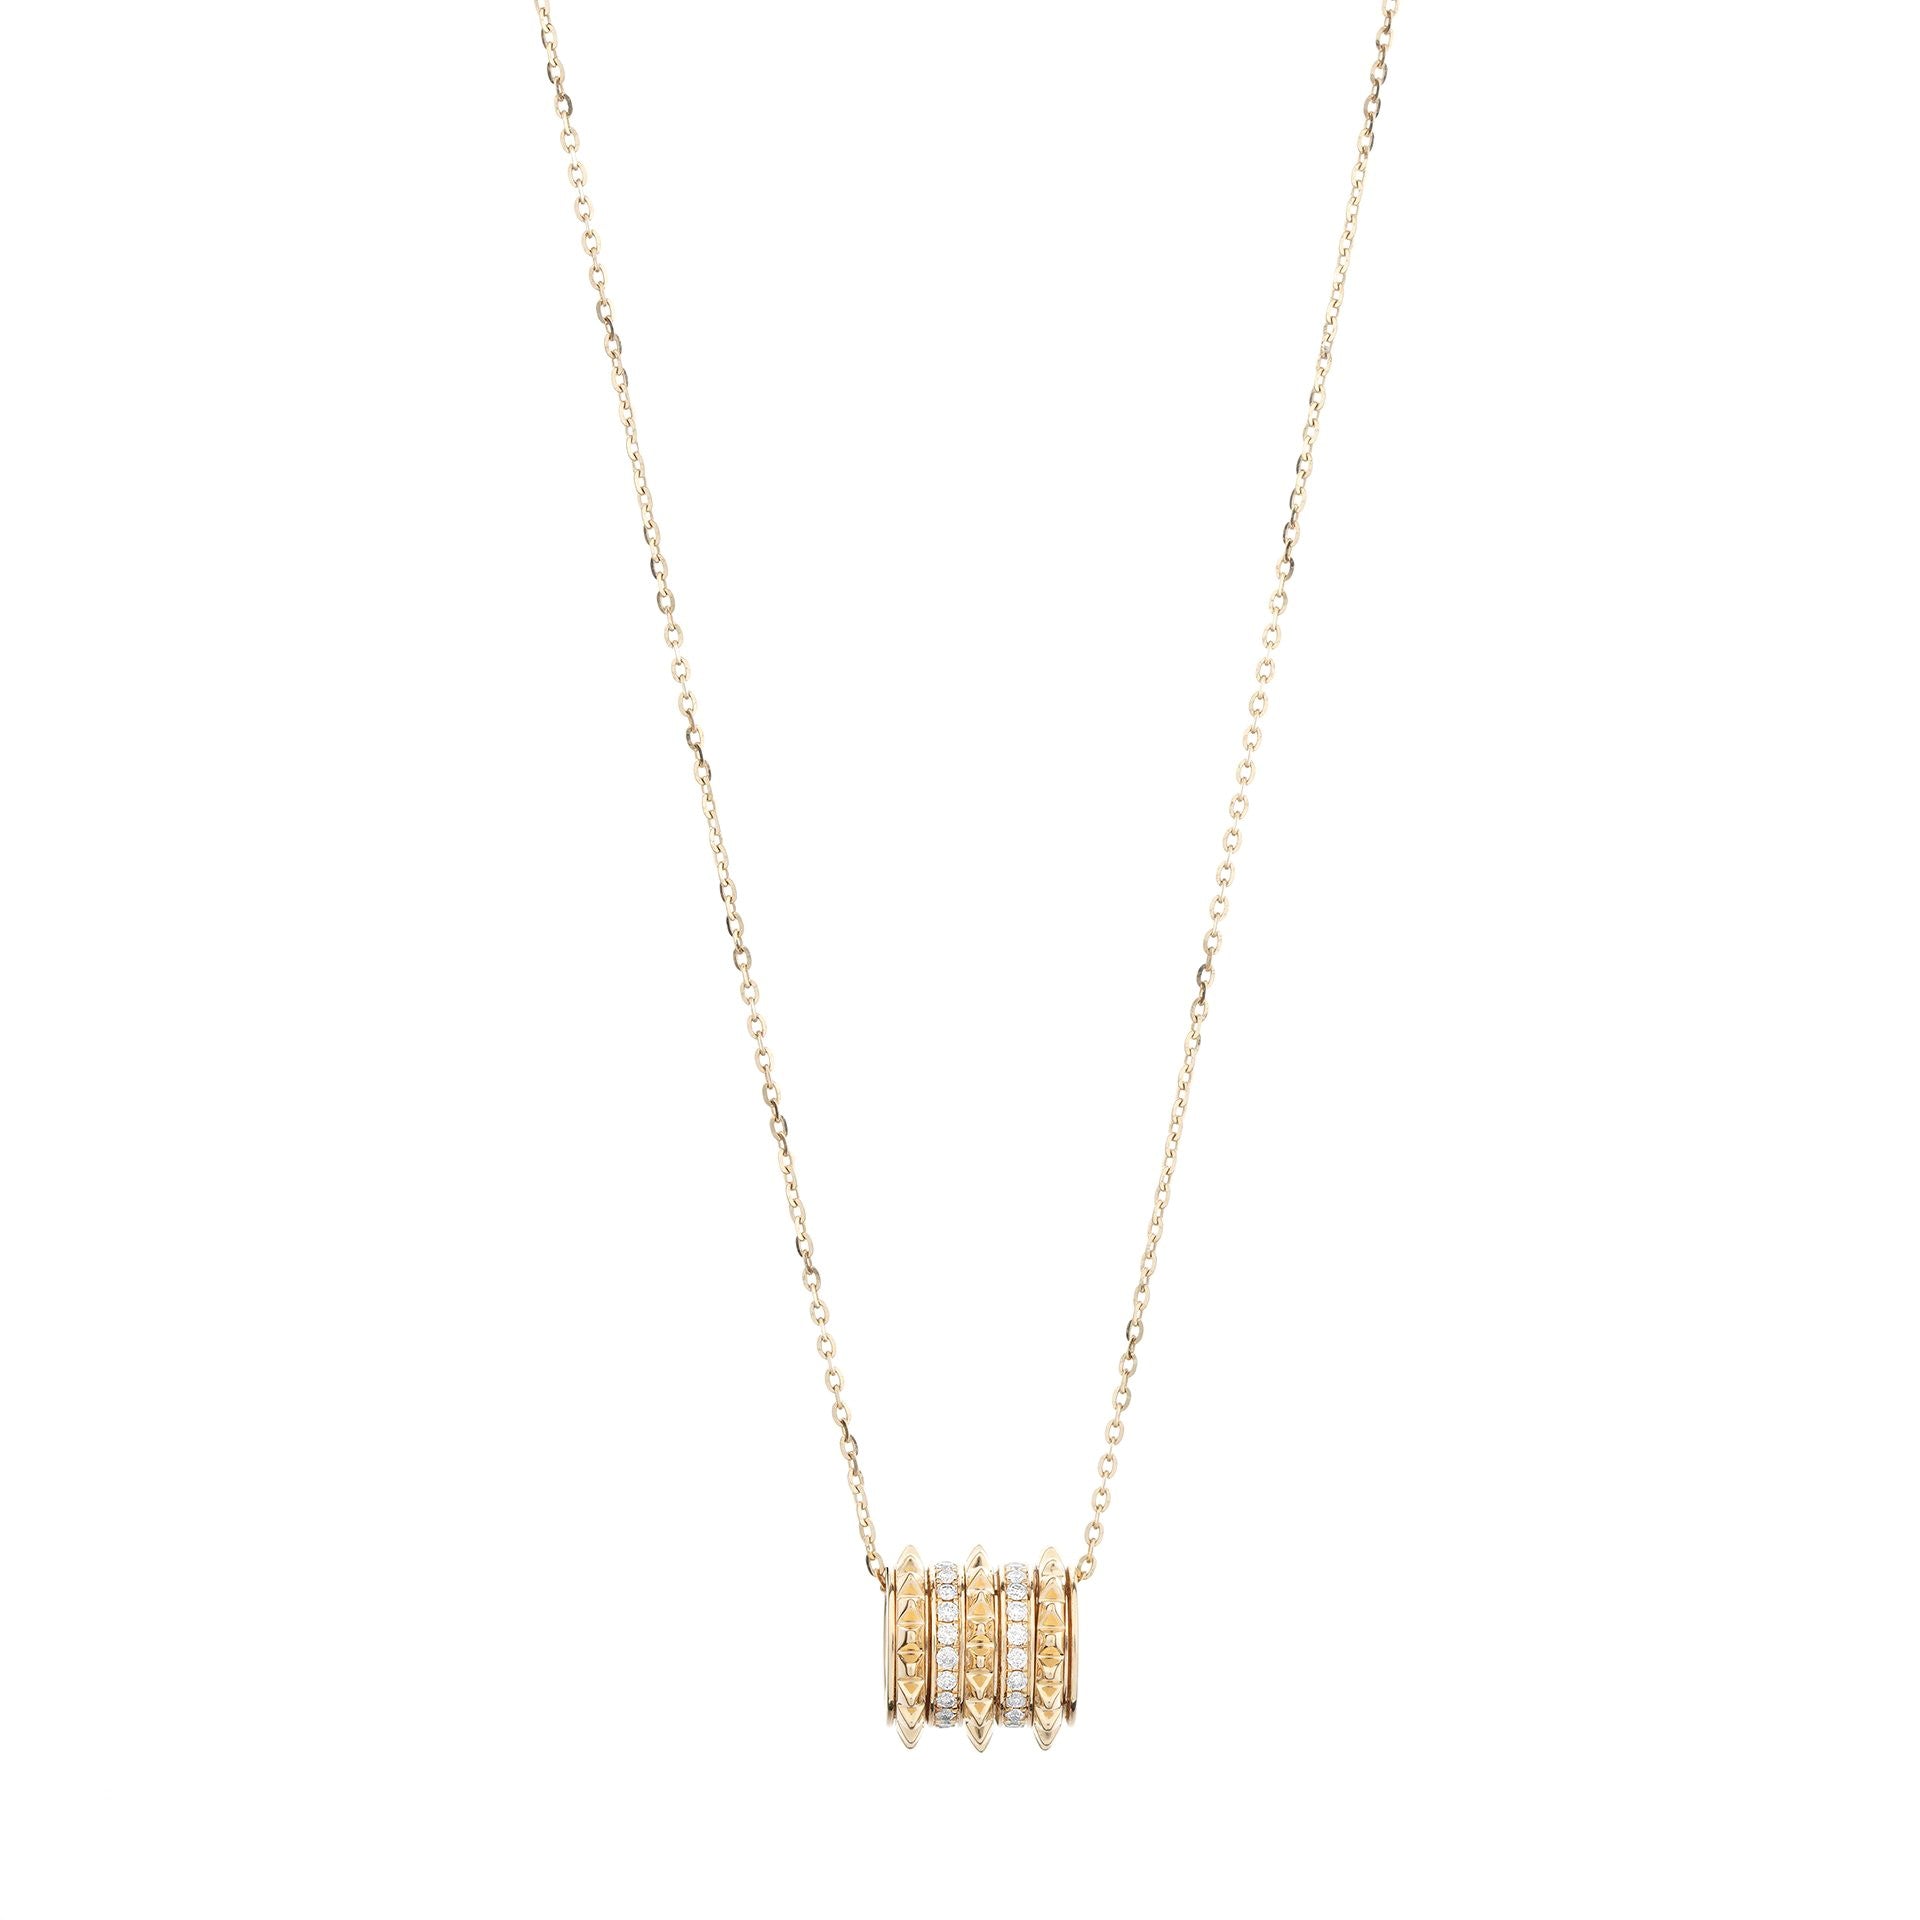 18k Hab El Hayl Evolution Necklace in Yellow Gold with Diamonds